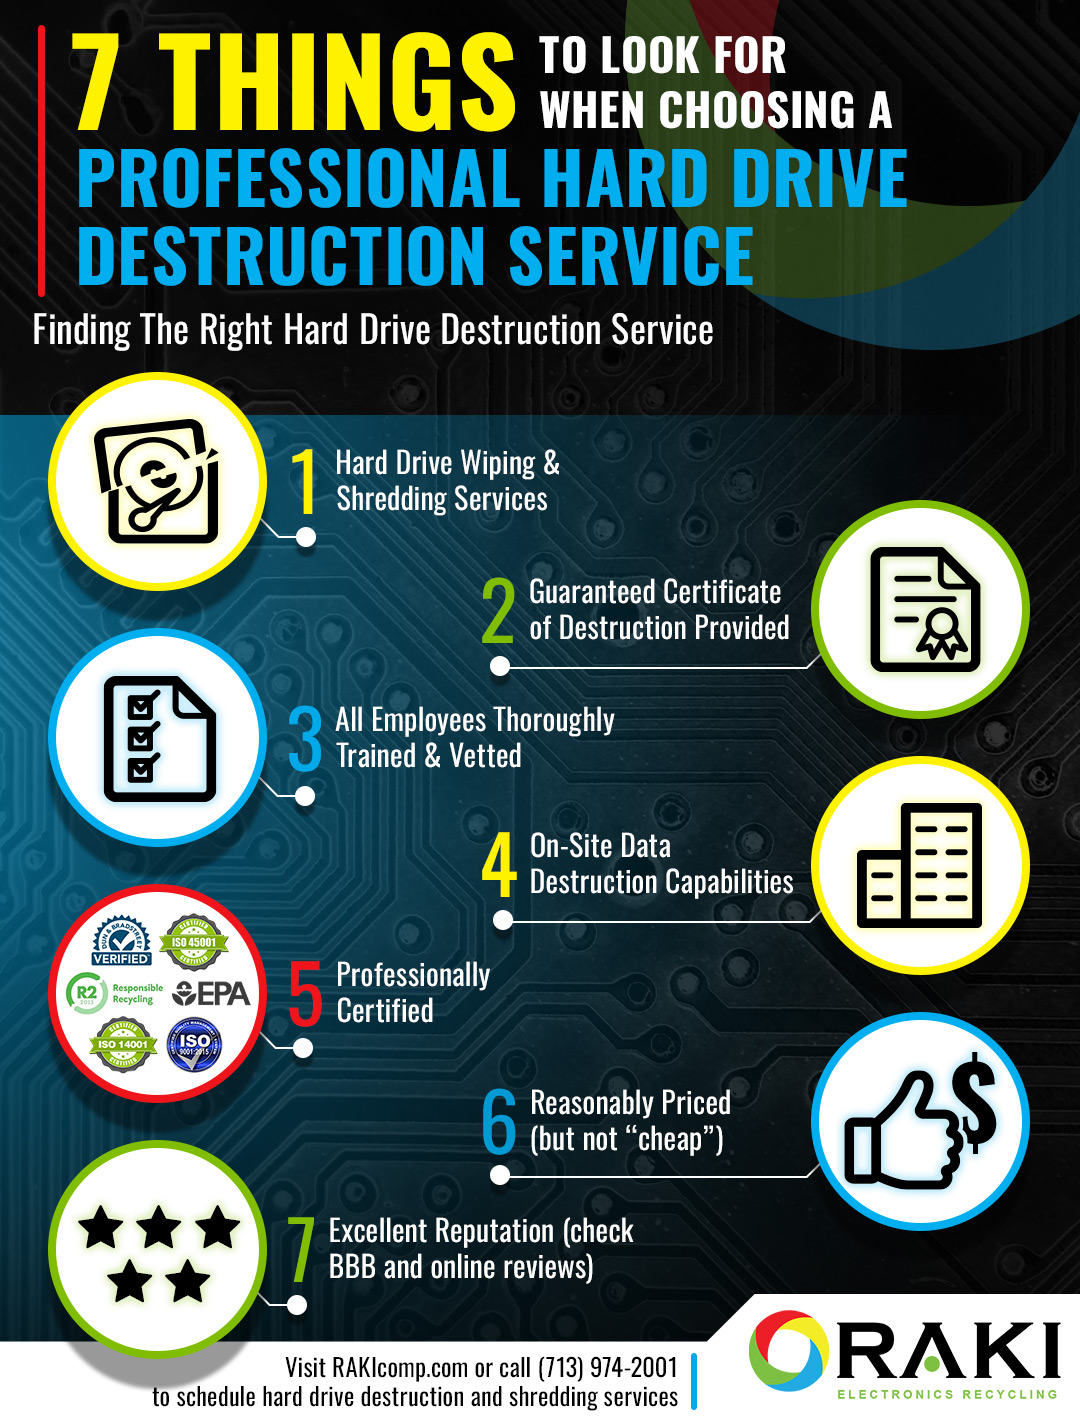 7 Things to Look for When Choosing a Professional Hard Drive Destruction Service